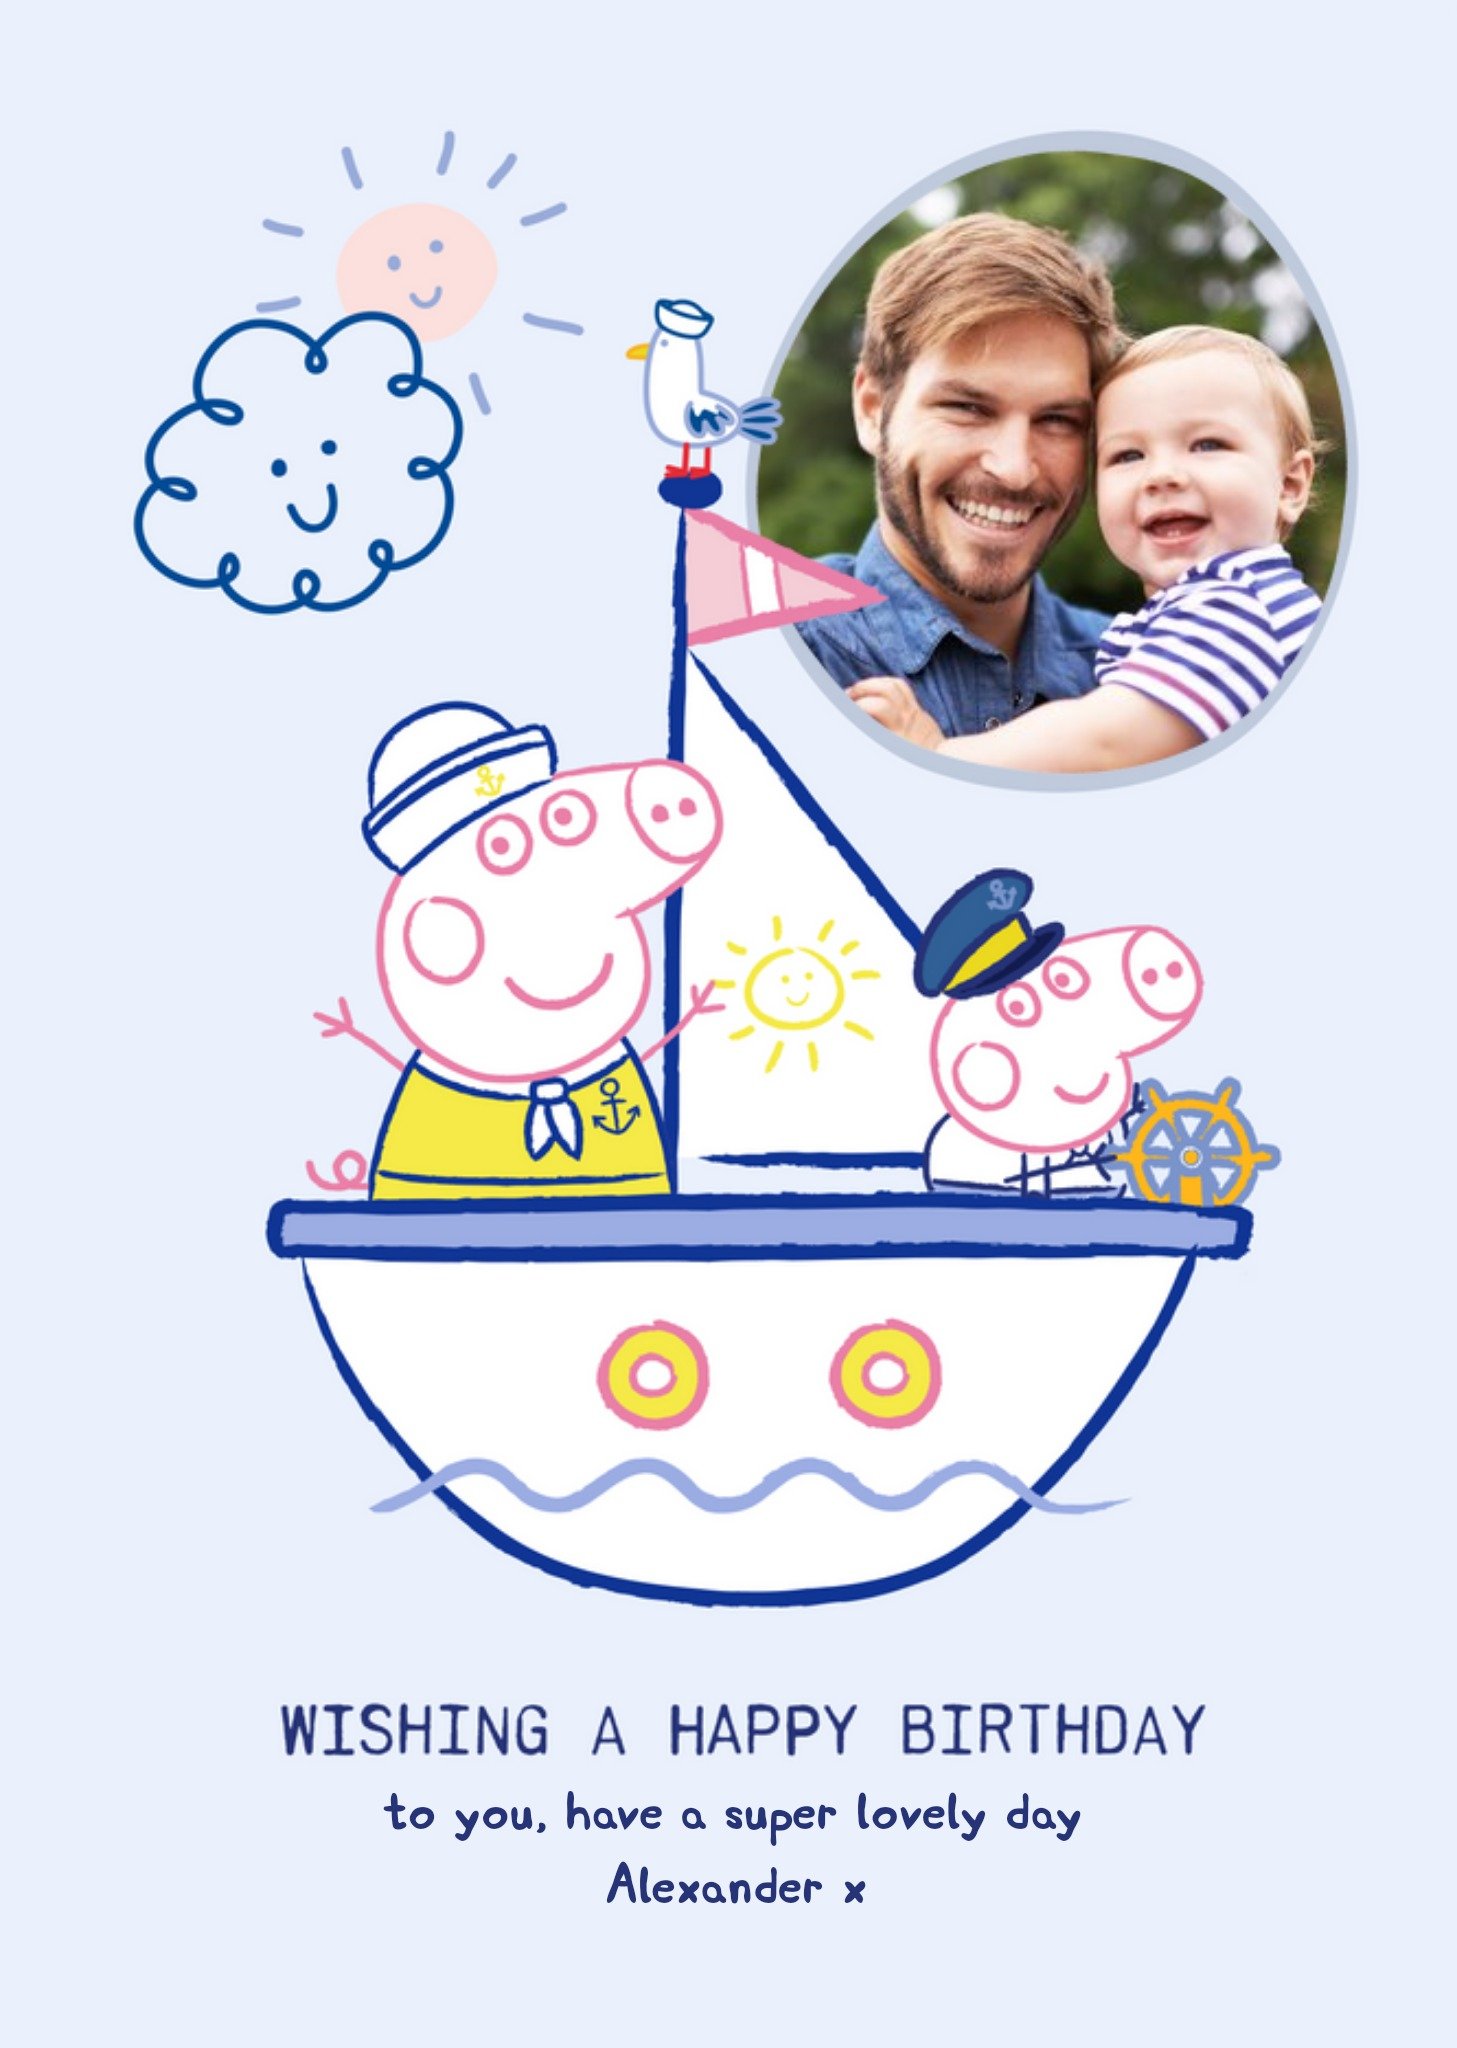 Peppa Pig And George Super Lovely Photo Upload Birthday Card, Large